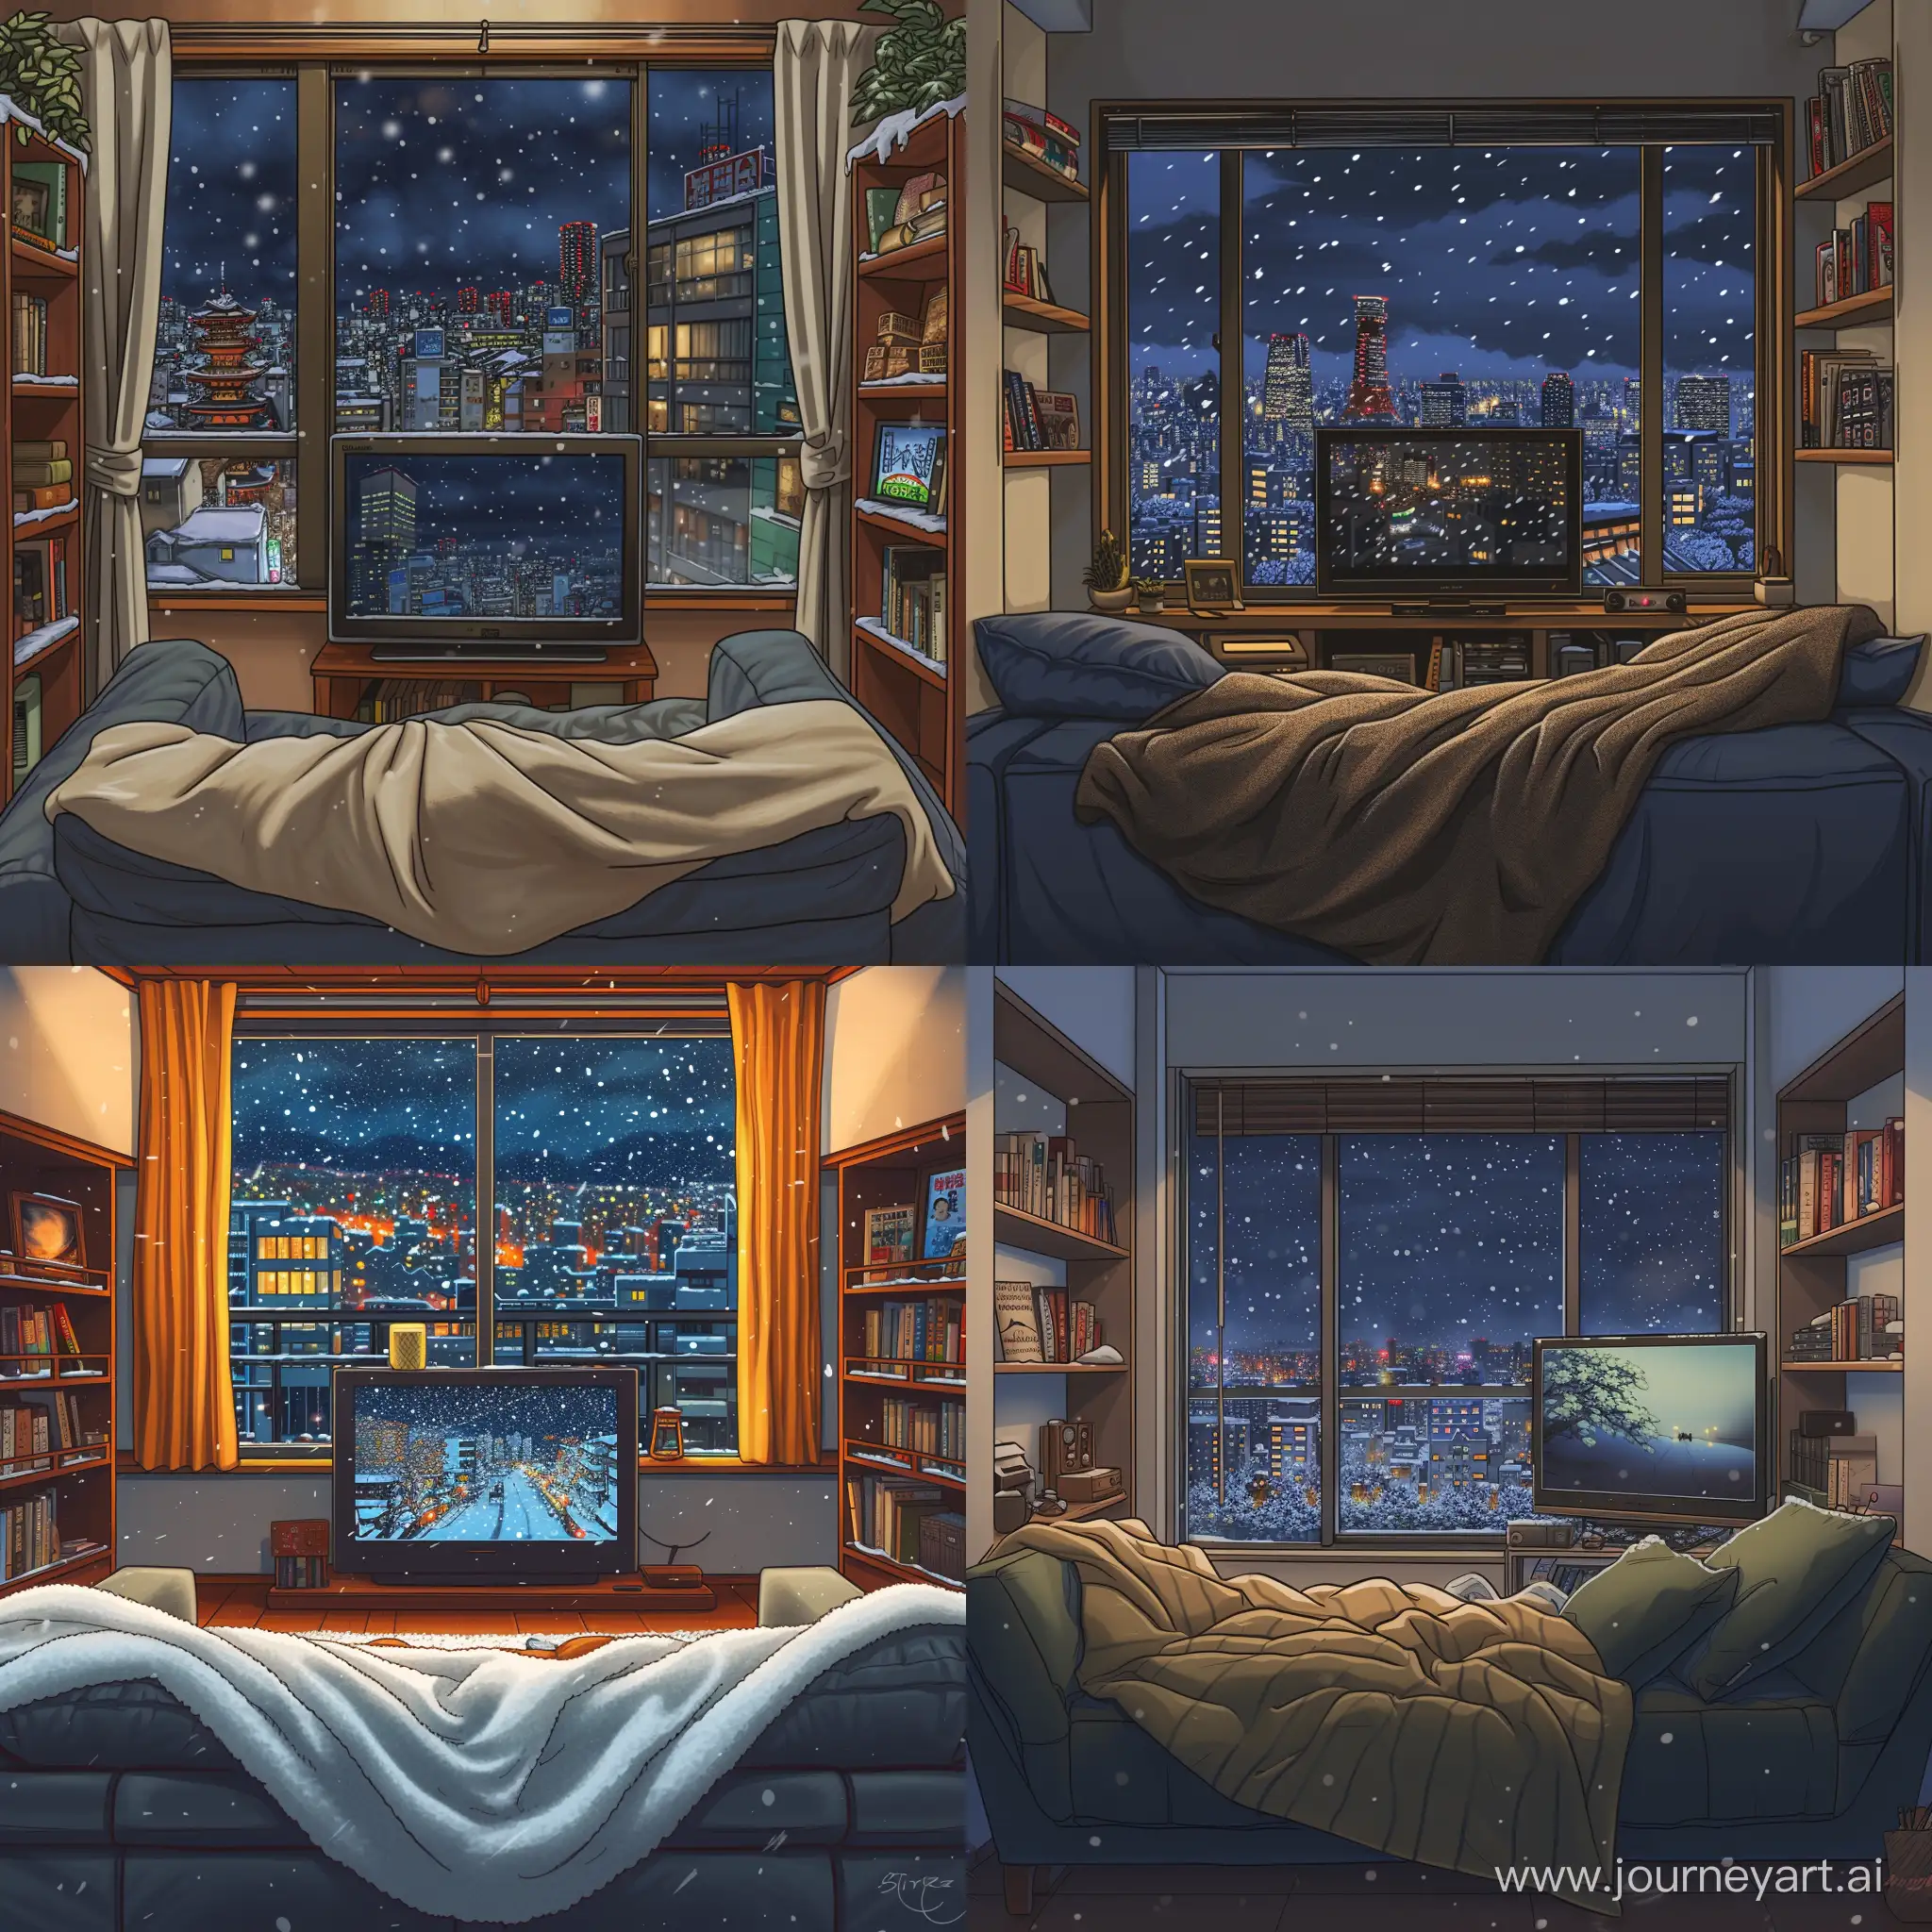 draw a room with a blanket on comfortable sofa in front of tv and shelf on the sides of tv, window in that room, out of window night japan city with some lights and snow